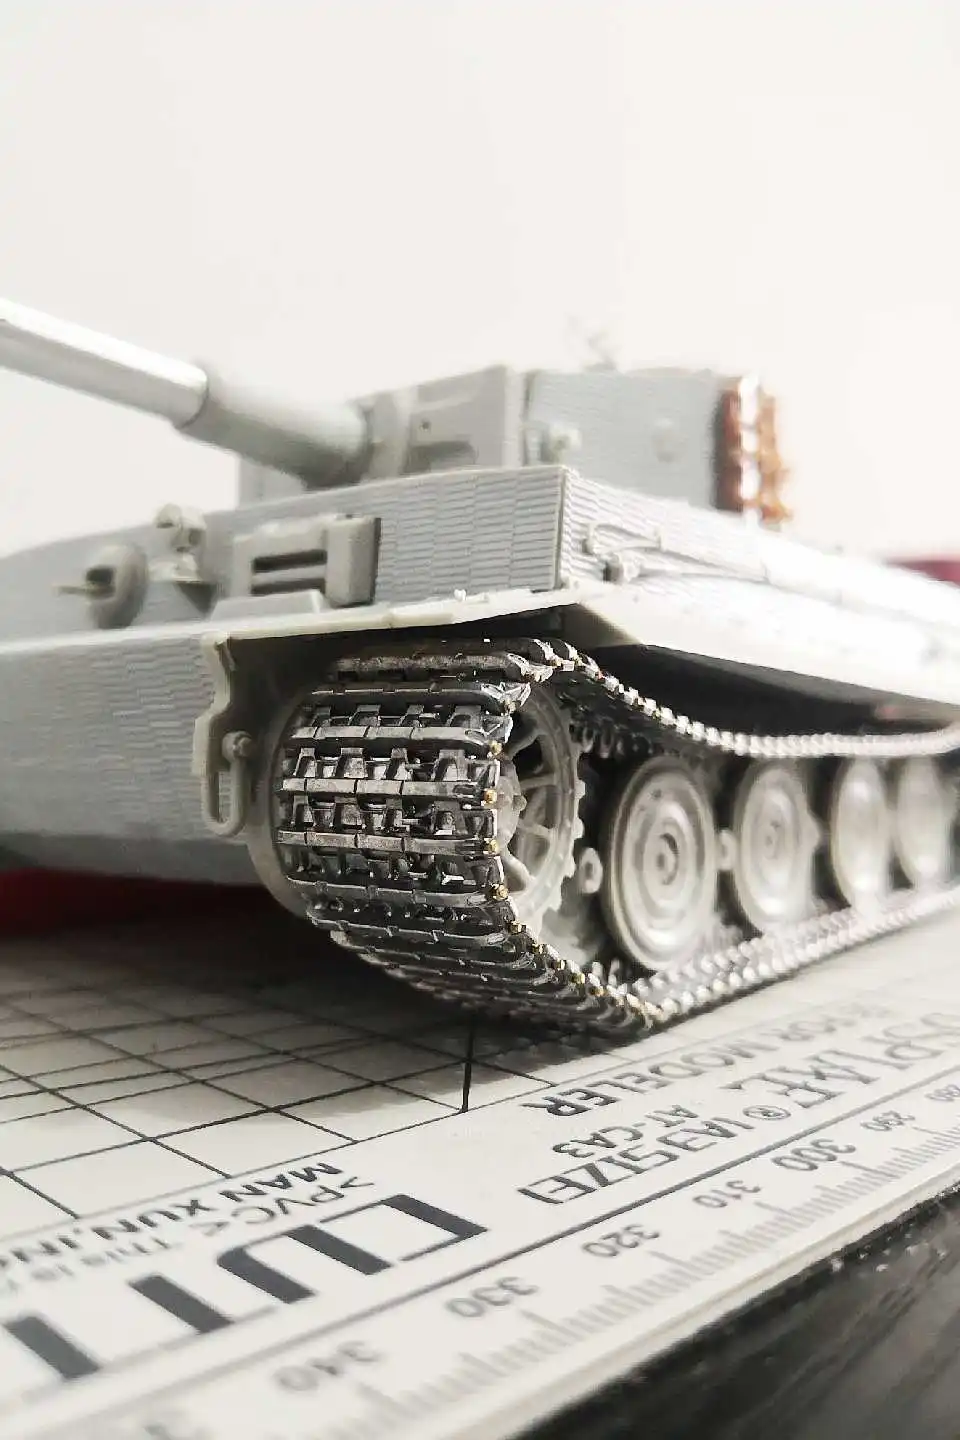 Details about   New 1/35 Metal Track Links for German Leopard 1 PZH2000 Tank Model w/metal pin